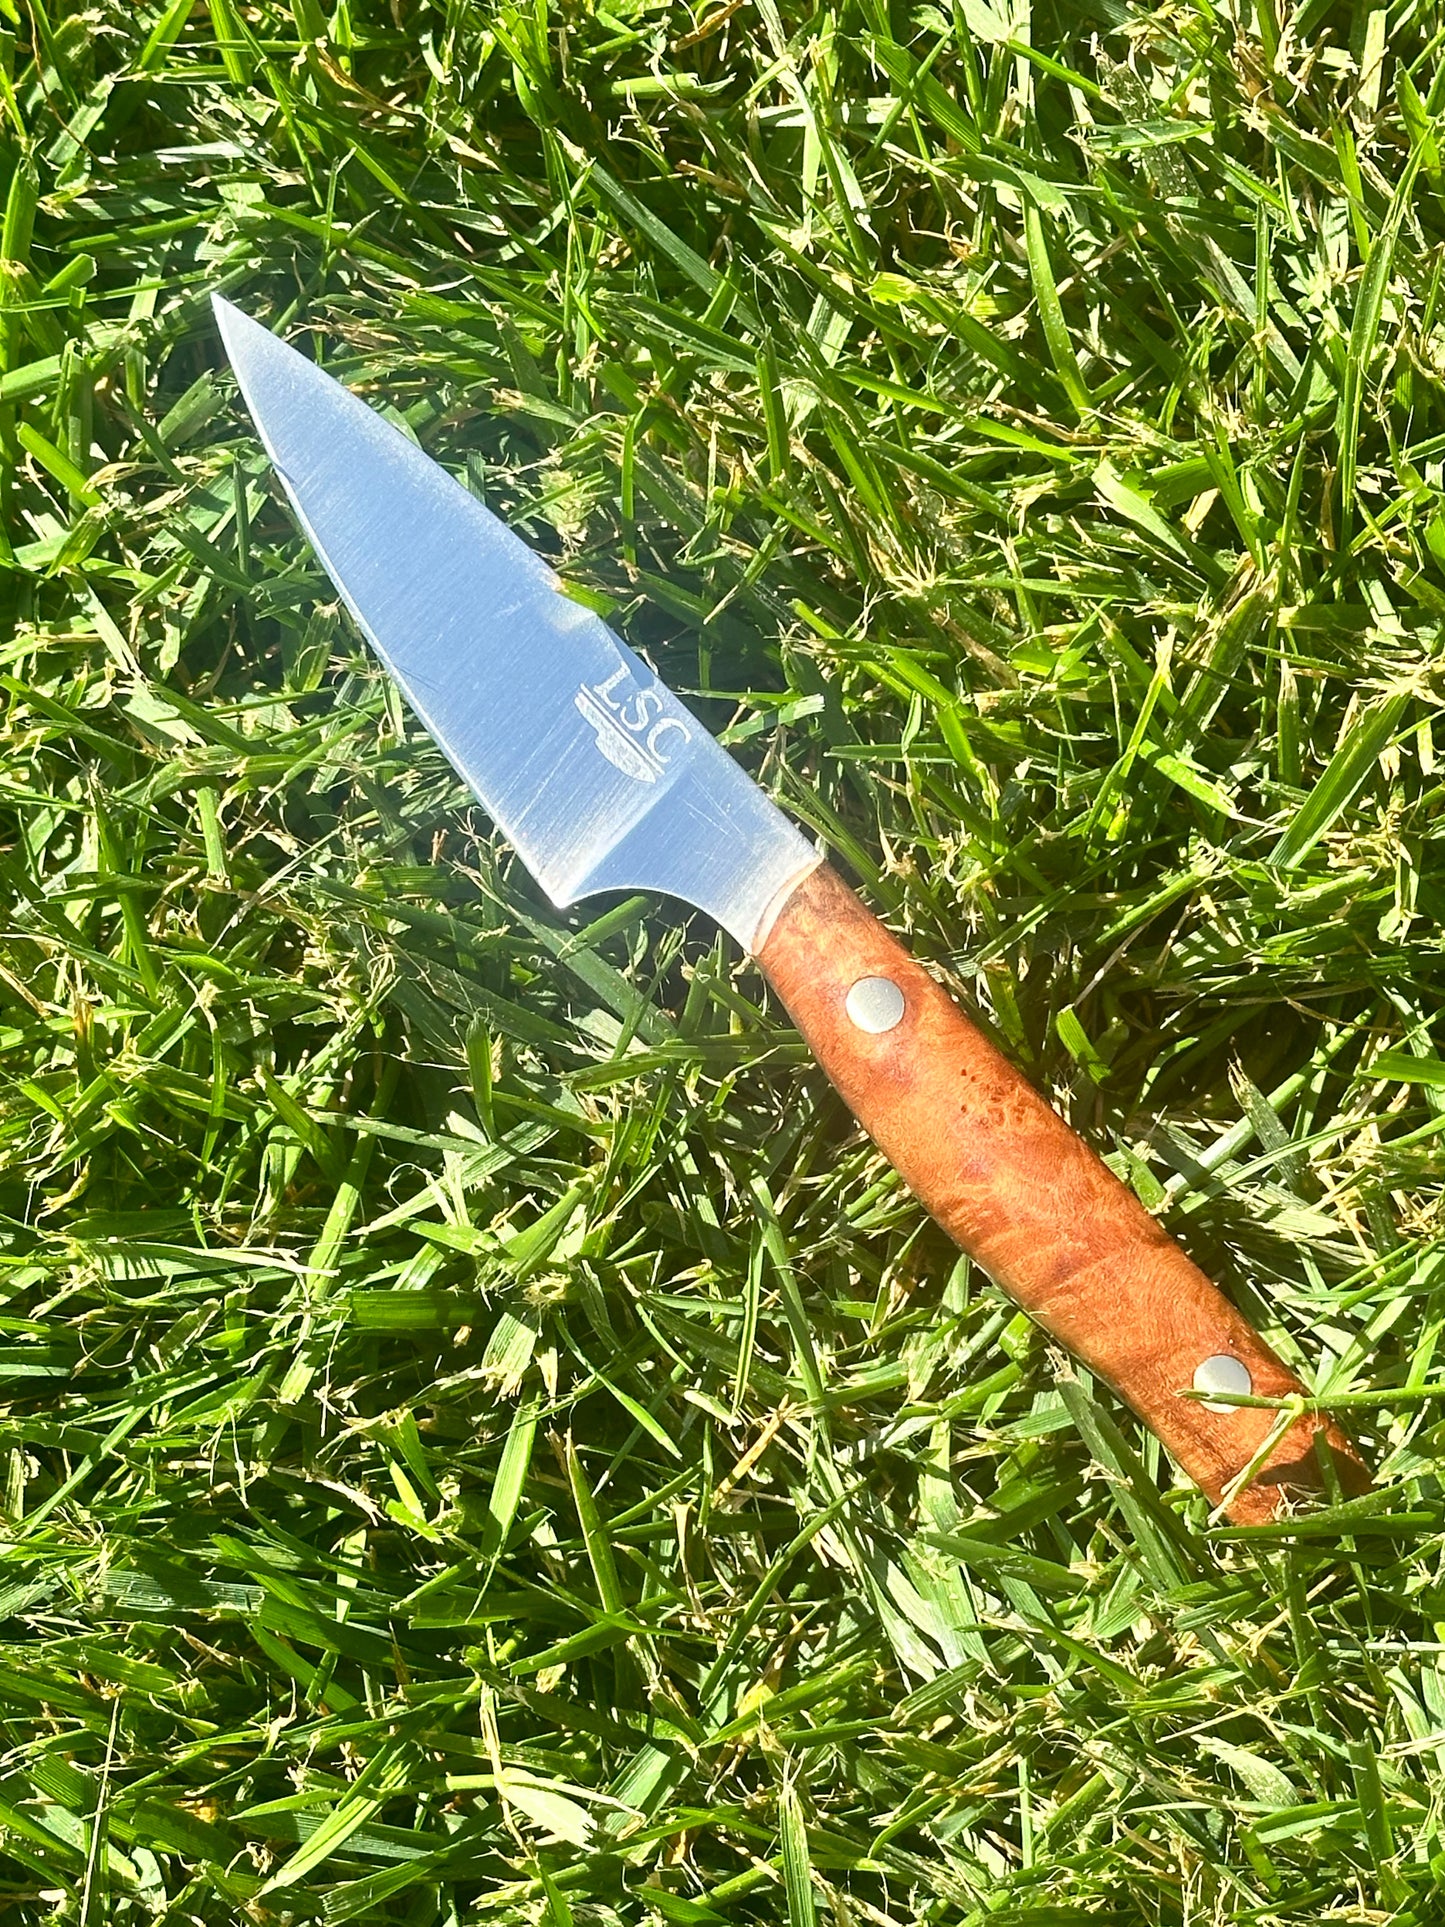 3" Pairing Knife w/ Stabilized Curly Maple [Available Now]